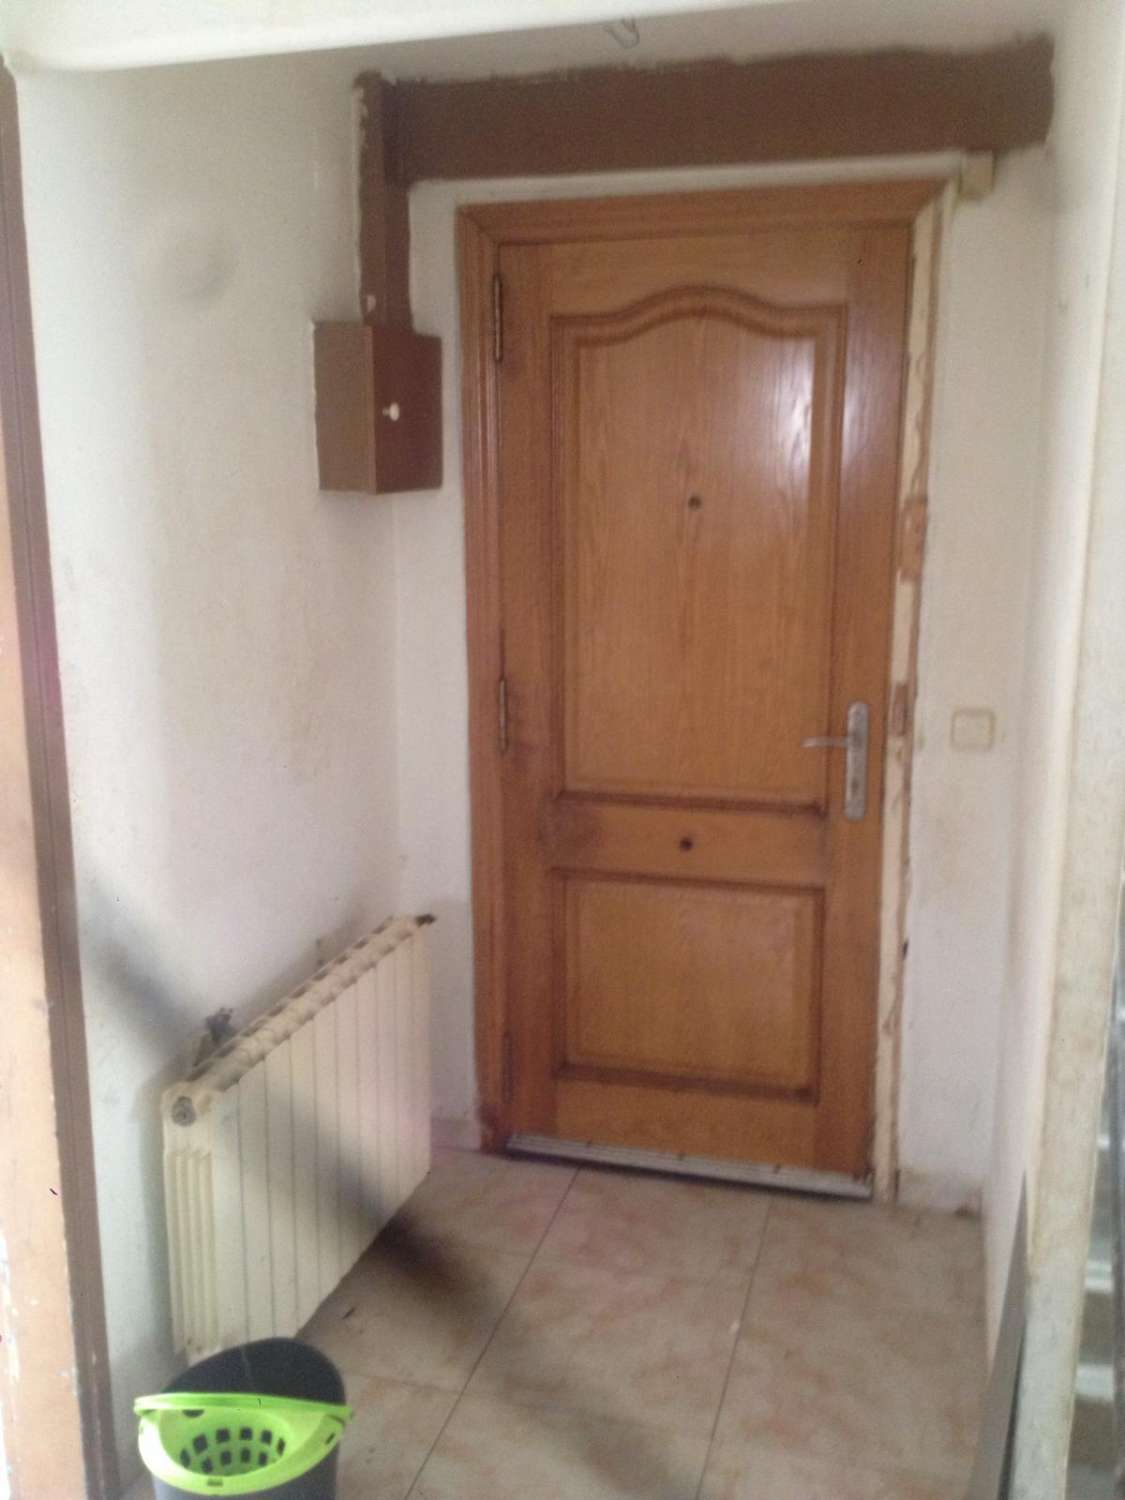 I am selling a 2-bedroom apartment in Sant Celoni